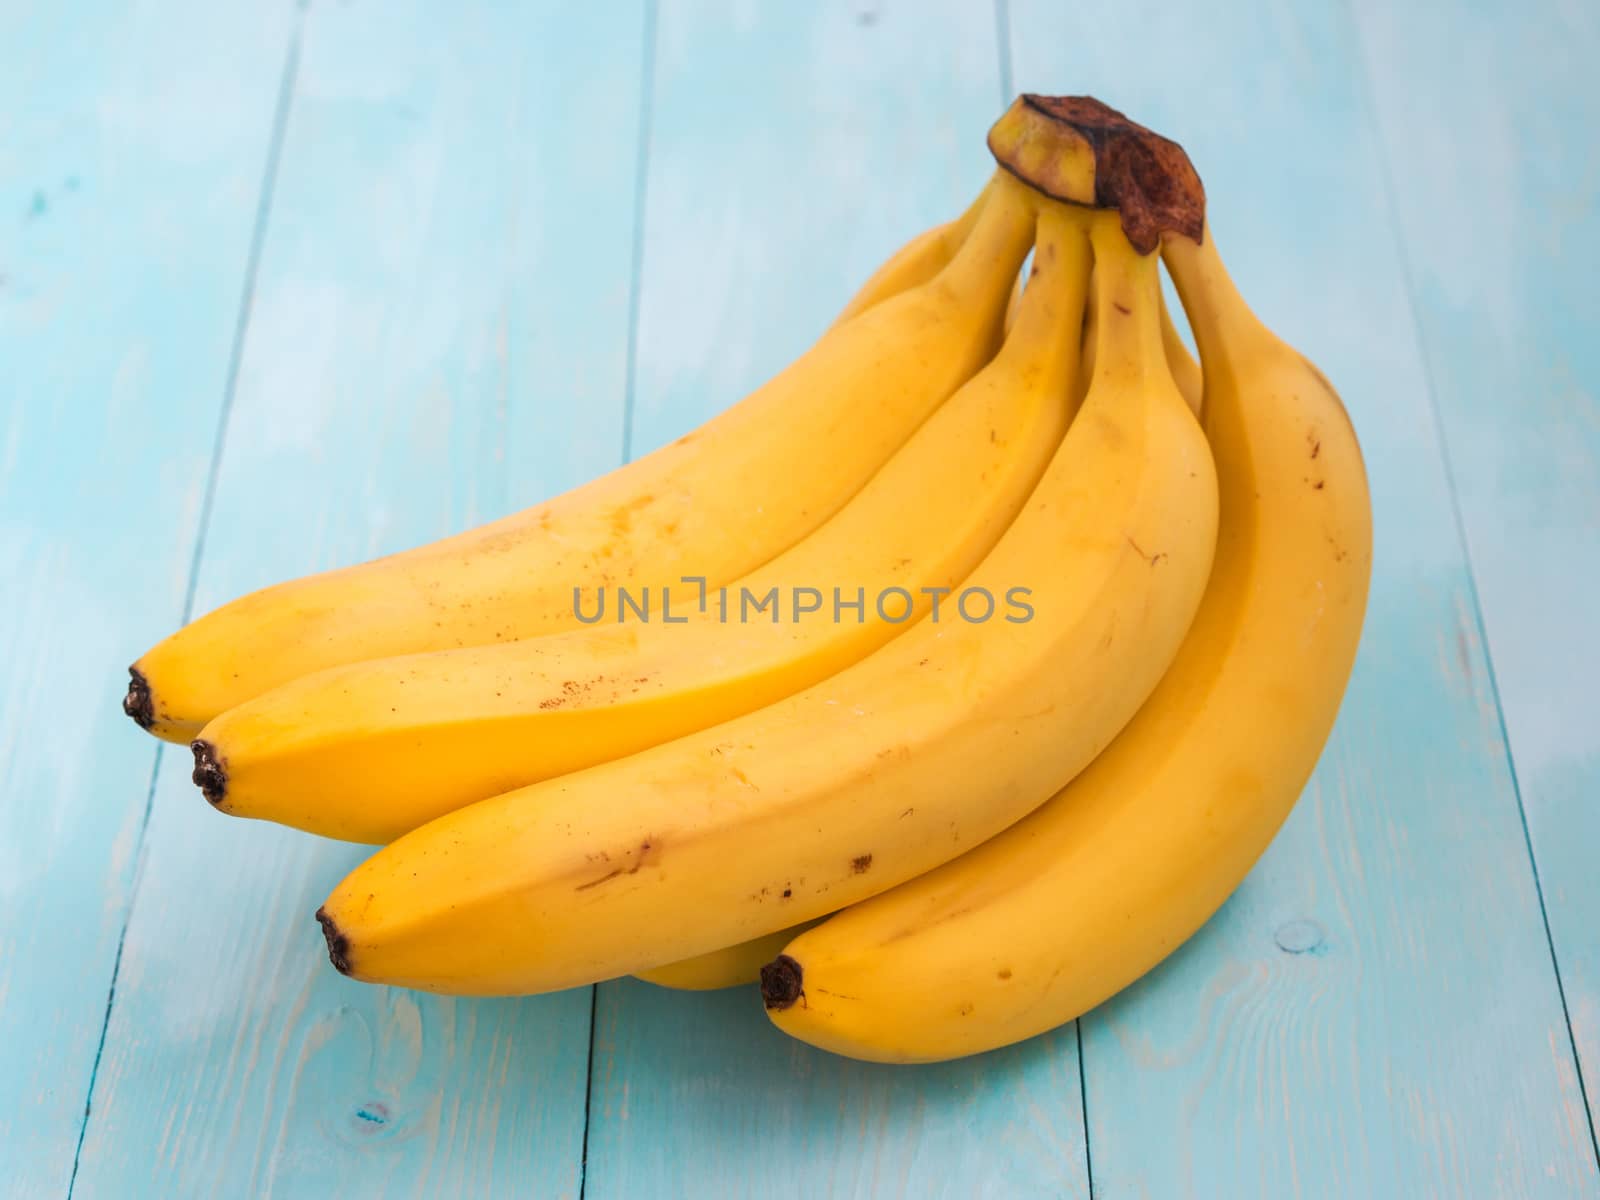 Colorful bananas on blue wooden table background